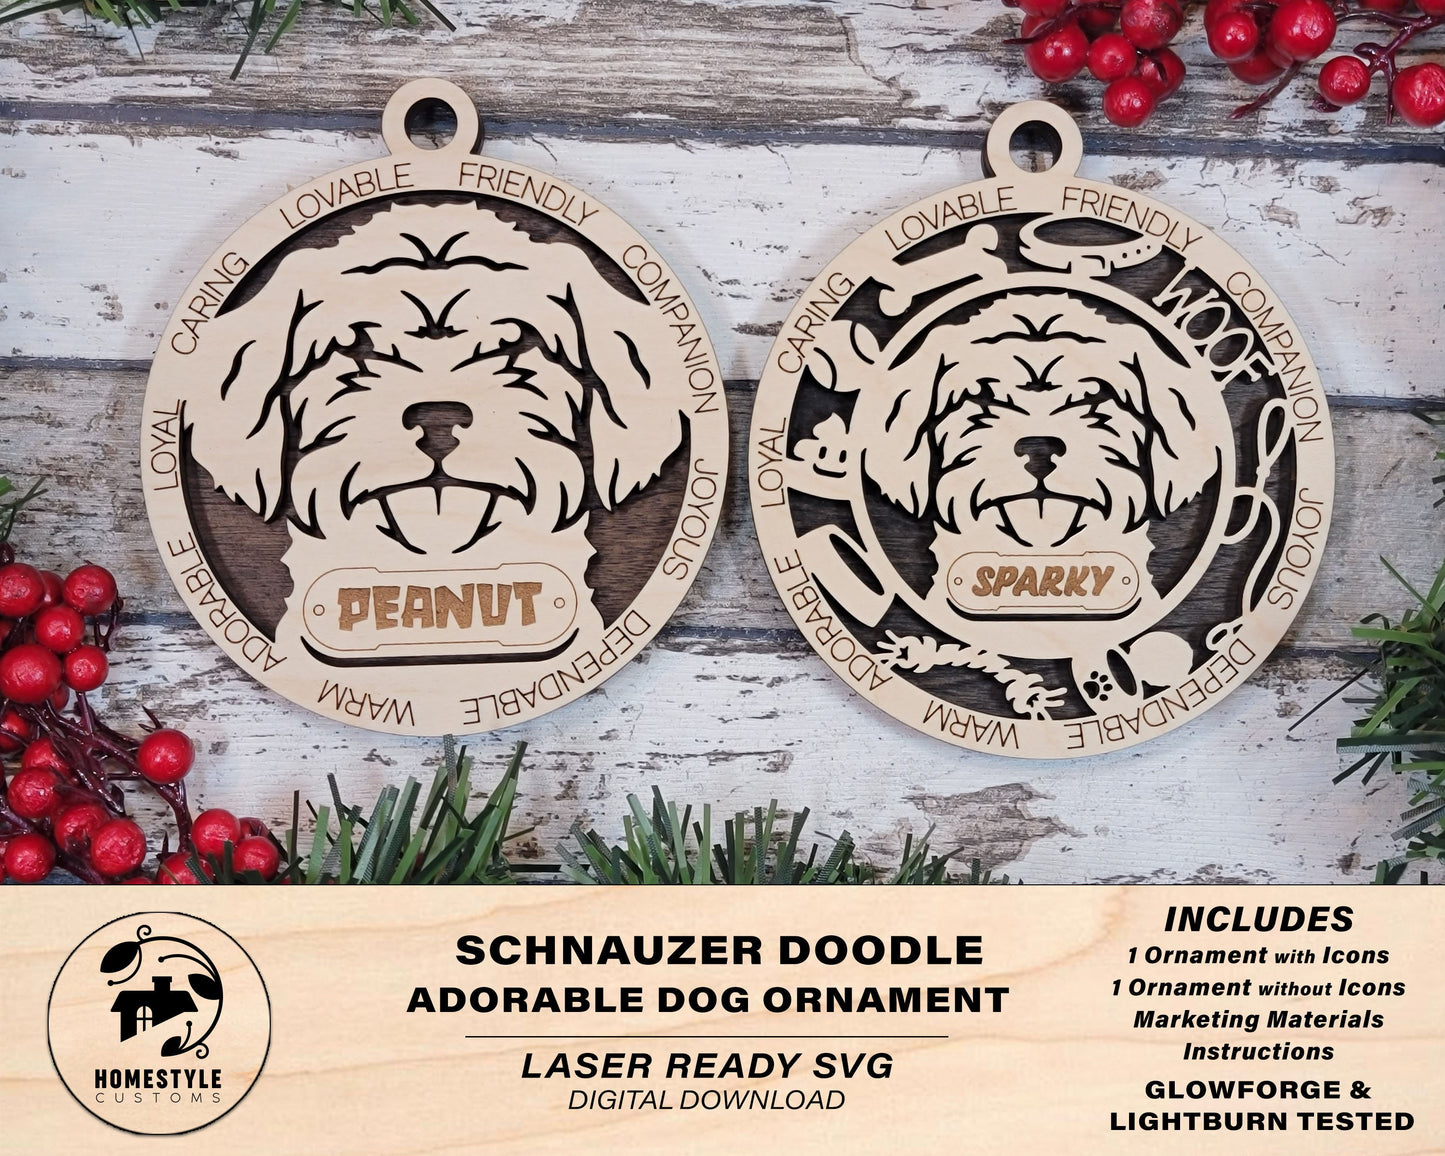 Schnauzer Doodle - Adorable Dog Ornaments - 2 Ornaments included - SVG, PDF, AI File Download - Sized for Glowforge